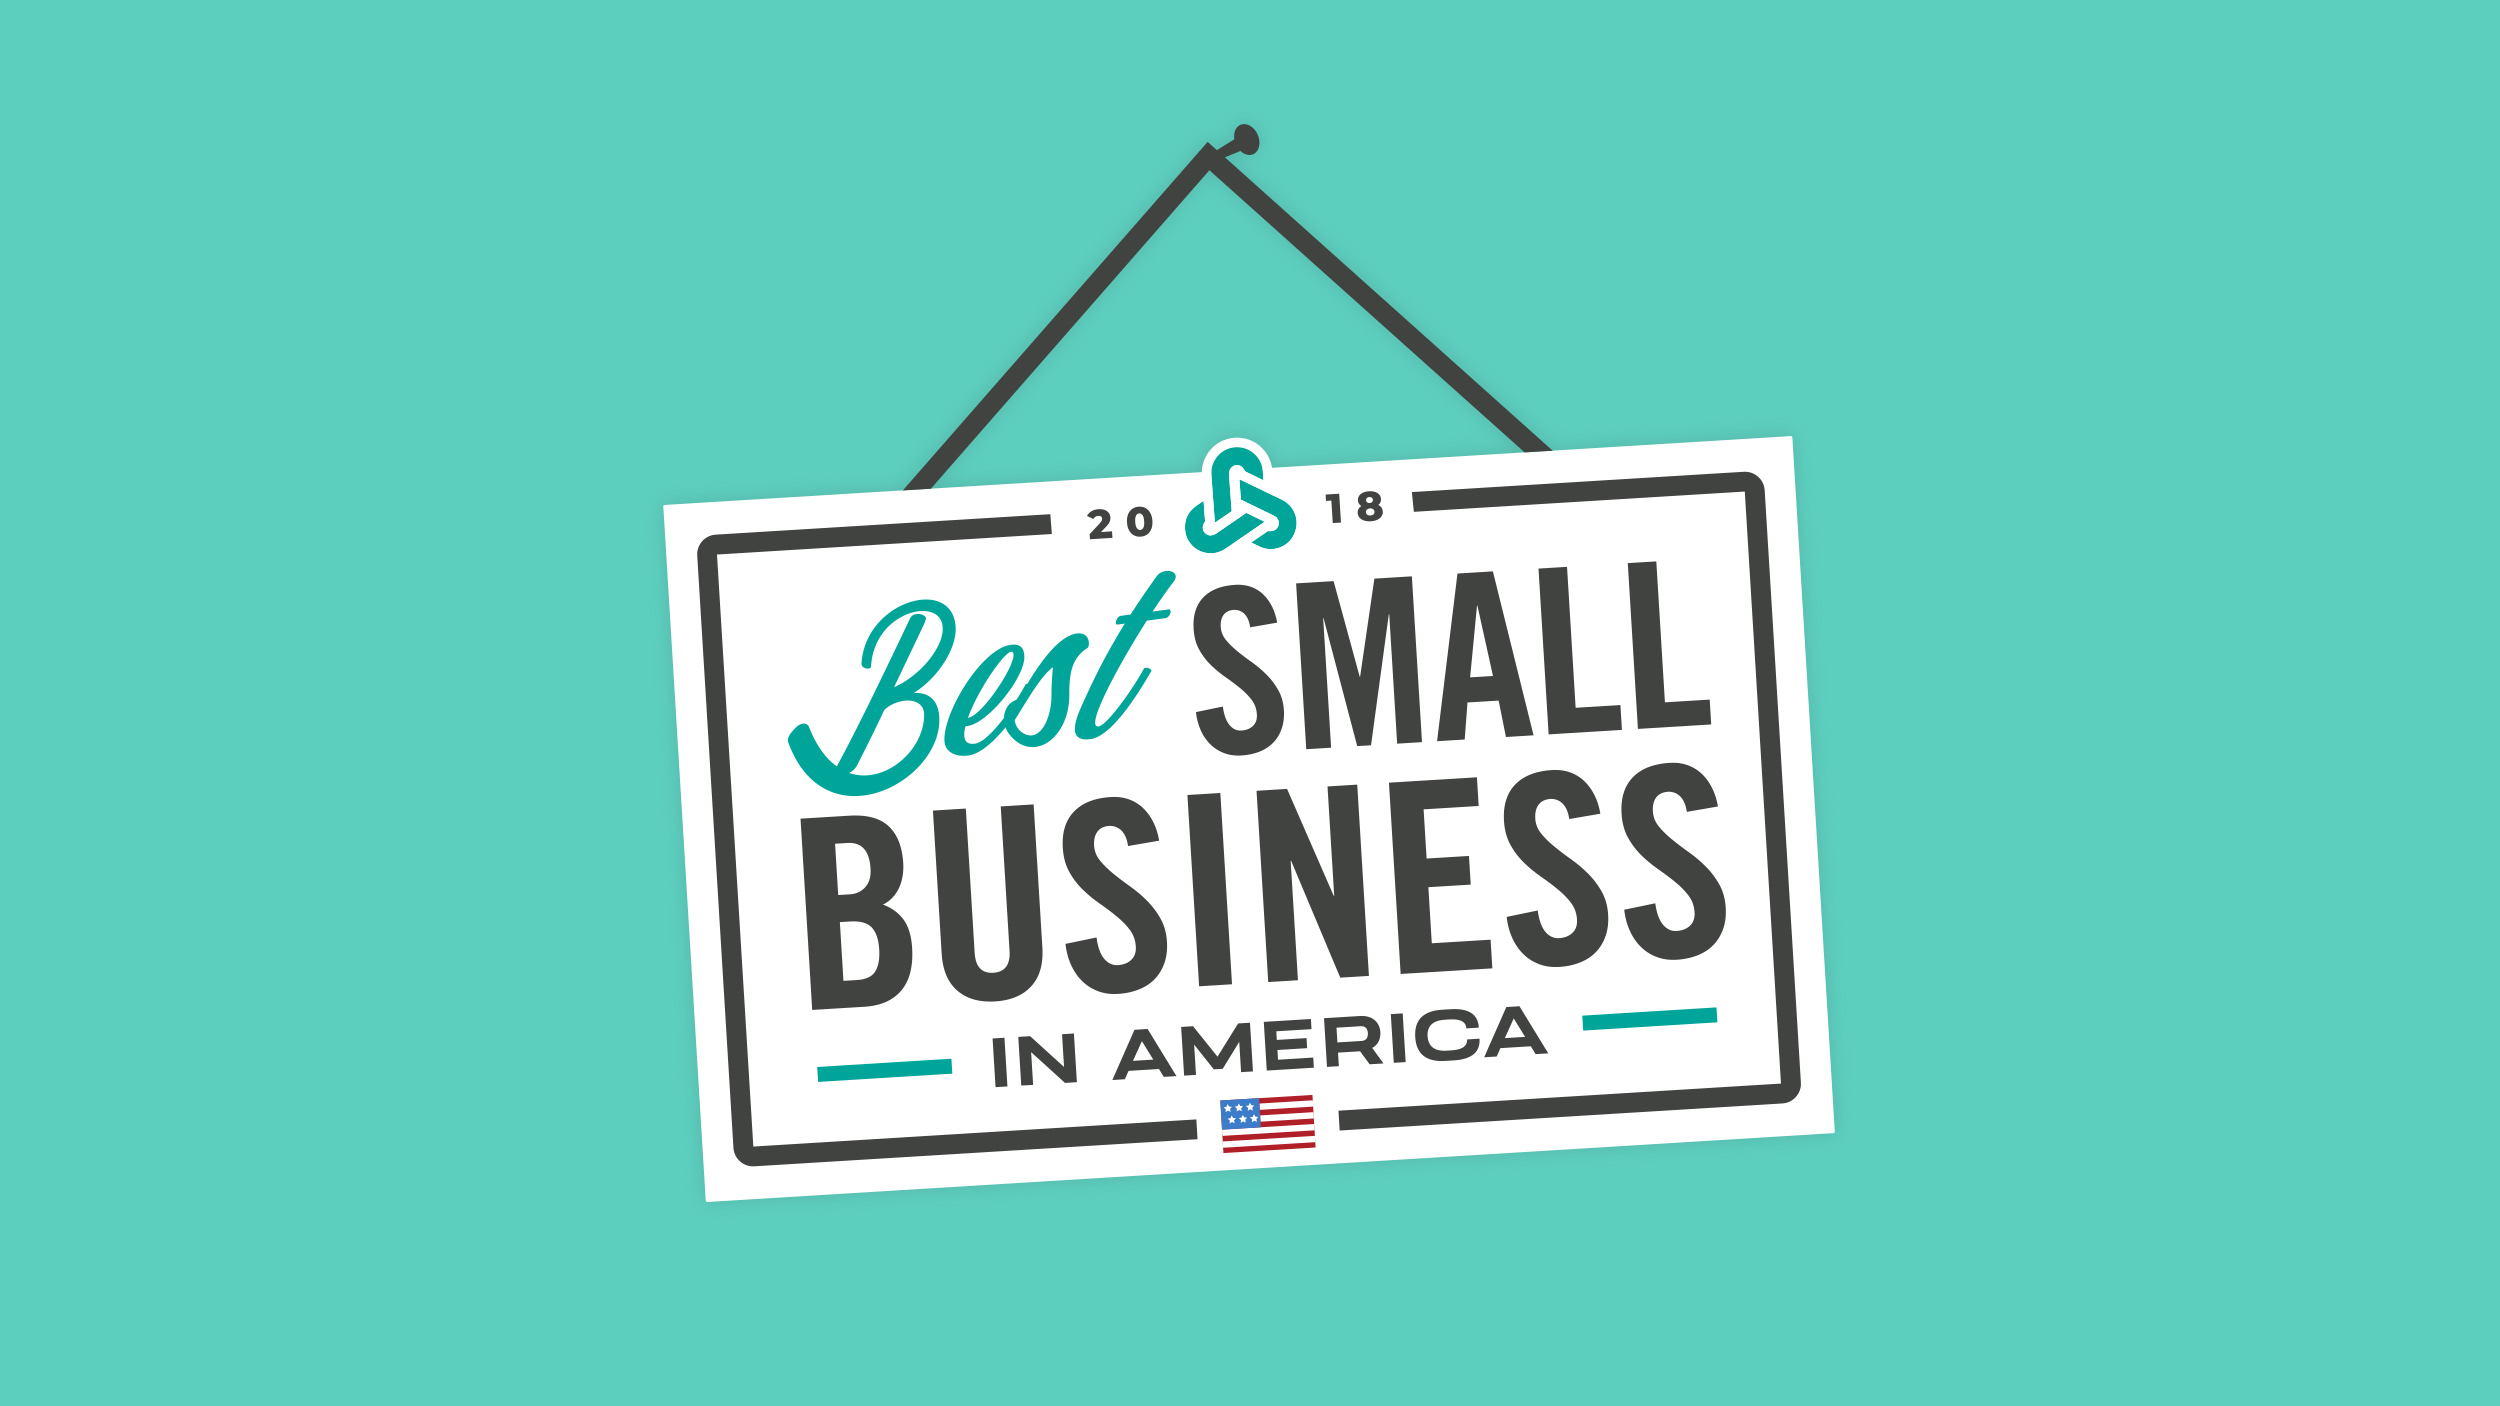 Rubicon's Best Small Business in America open sign logo design